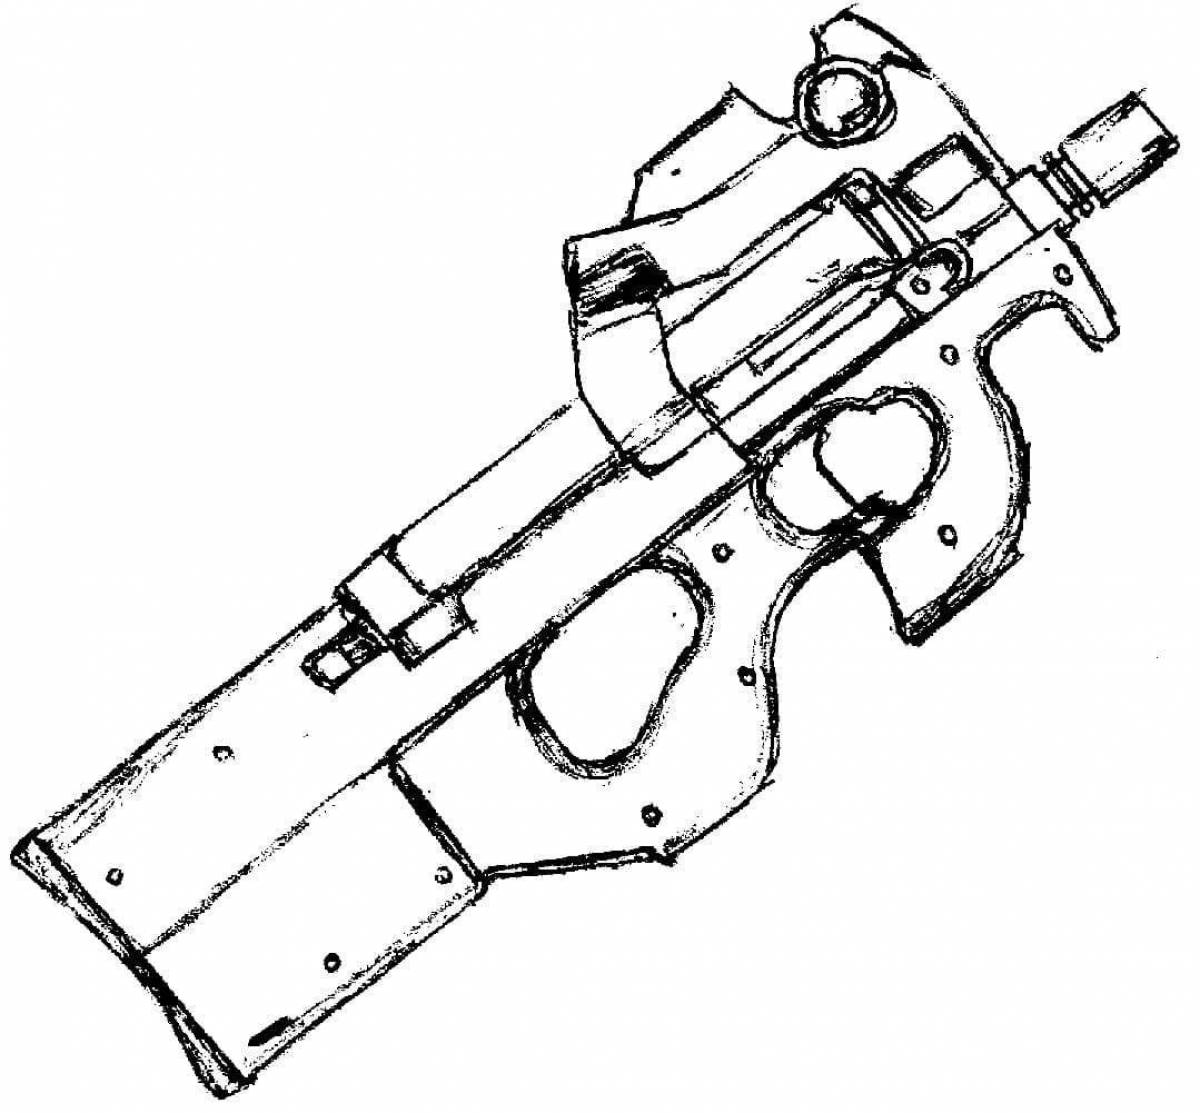 Charming weapon coloring page